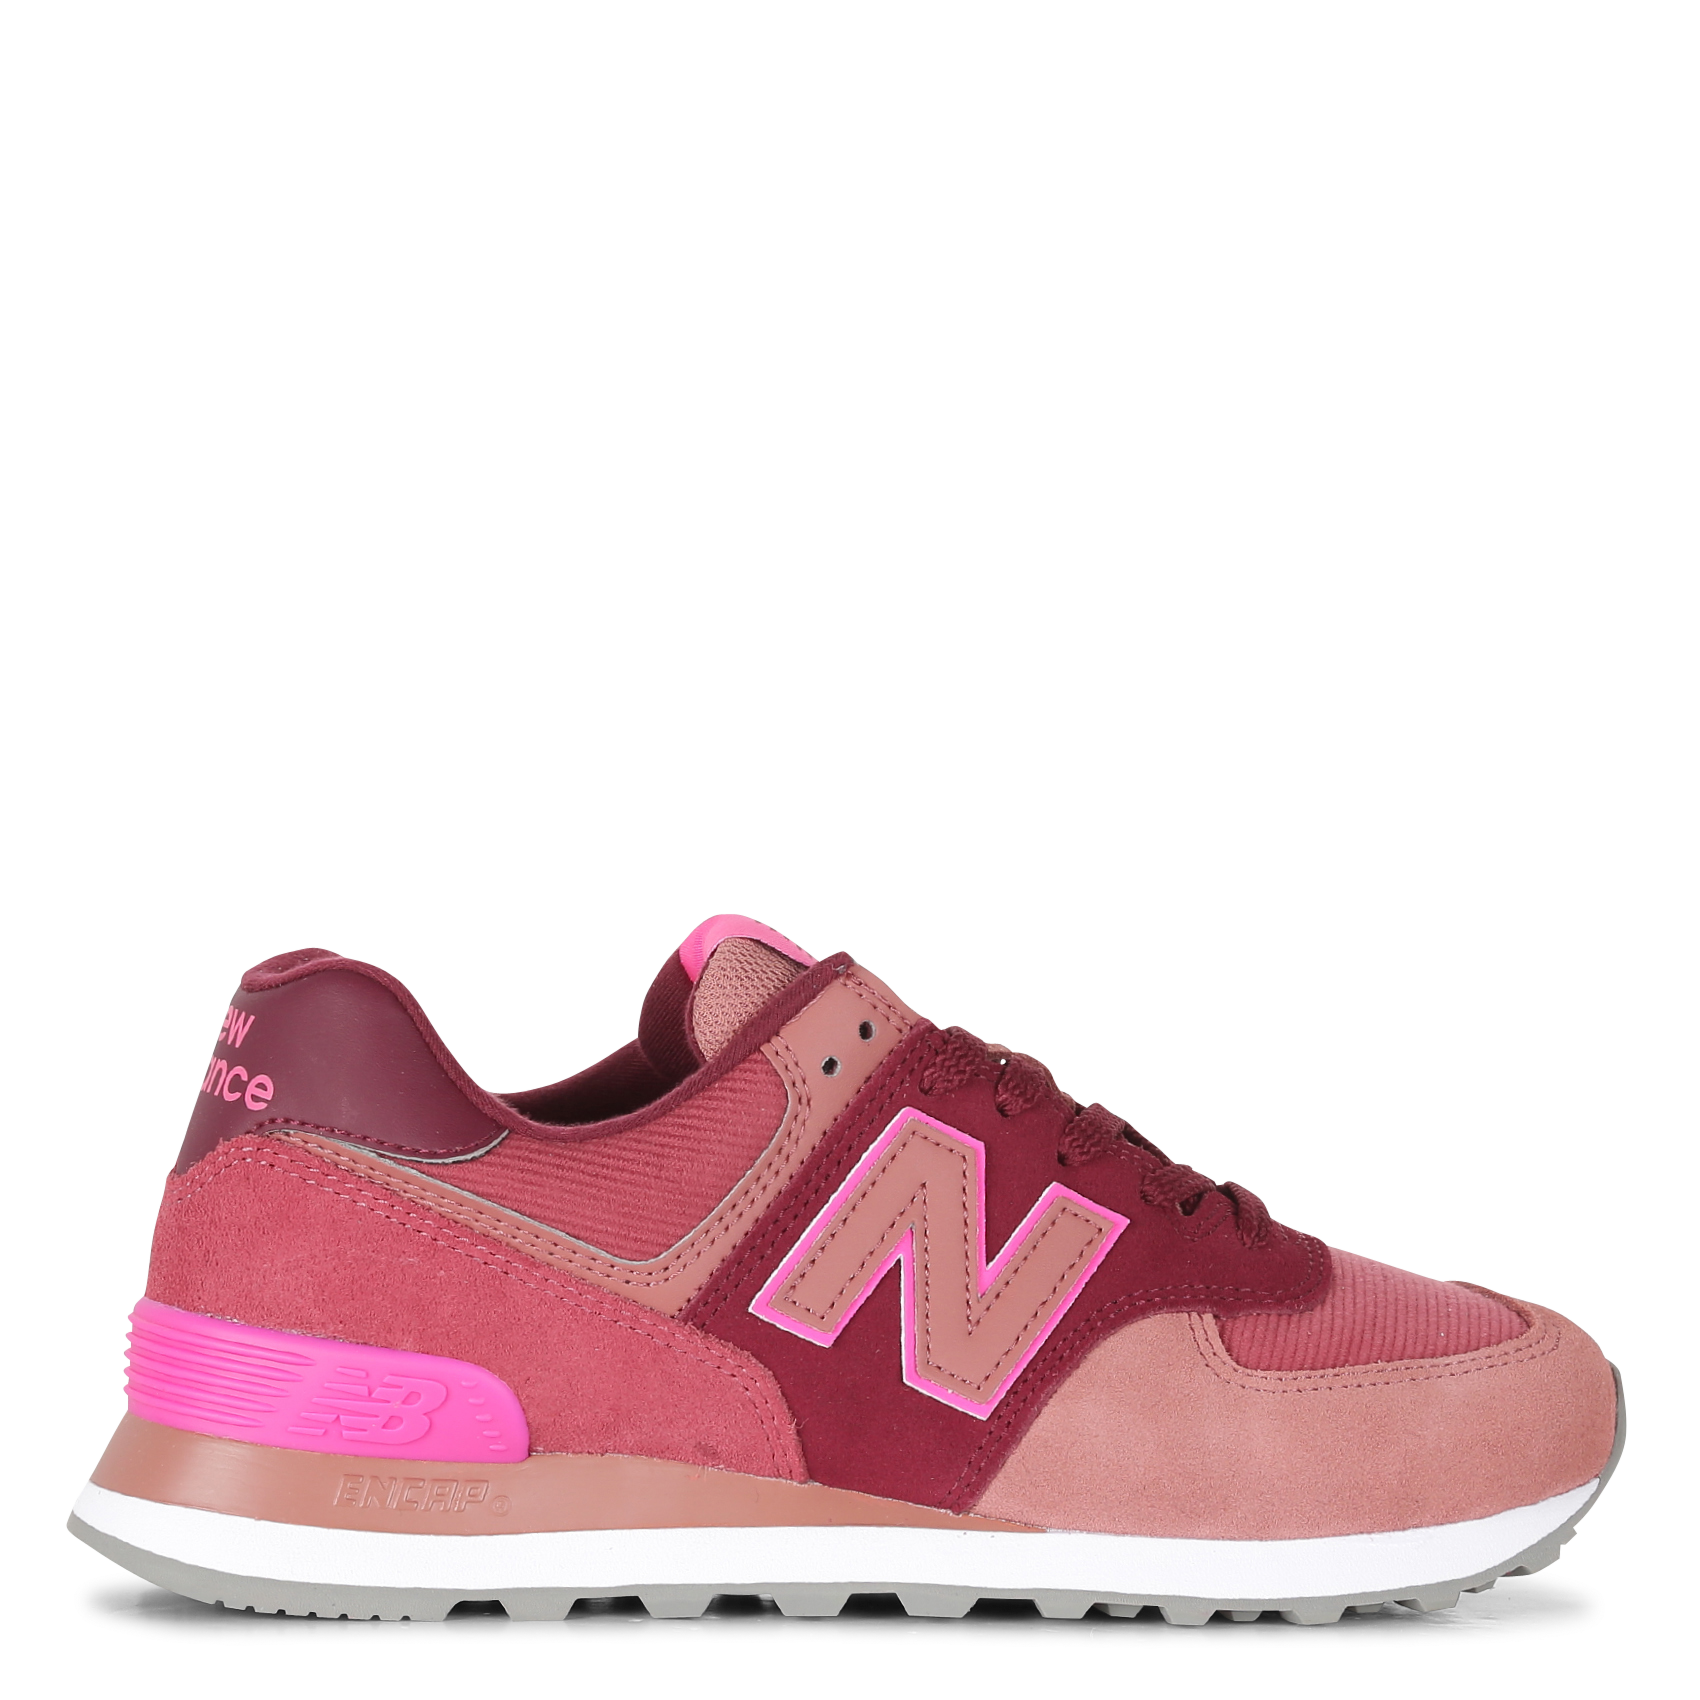 new balance for women on sale